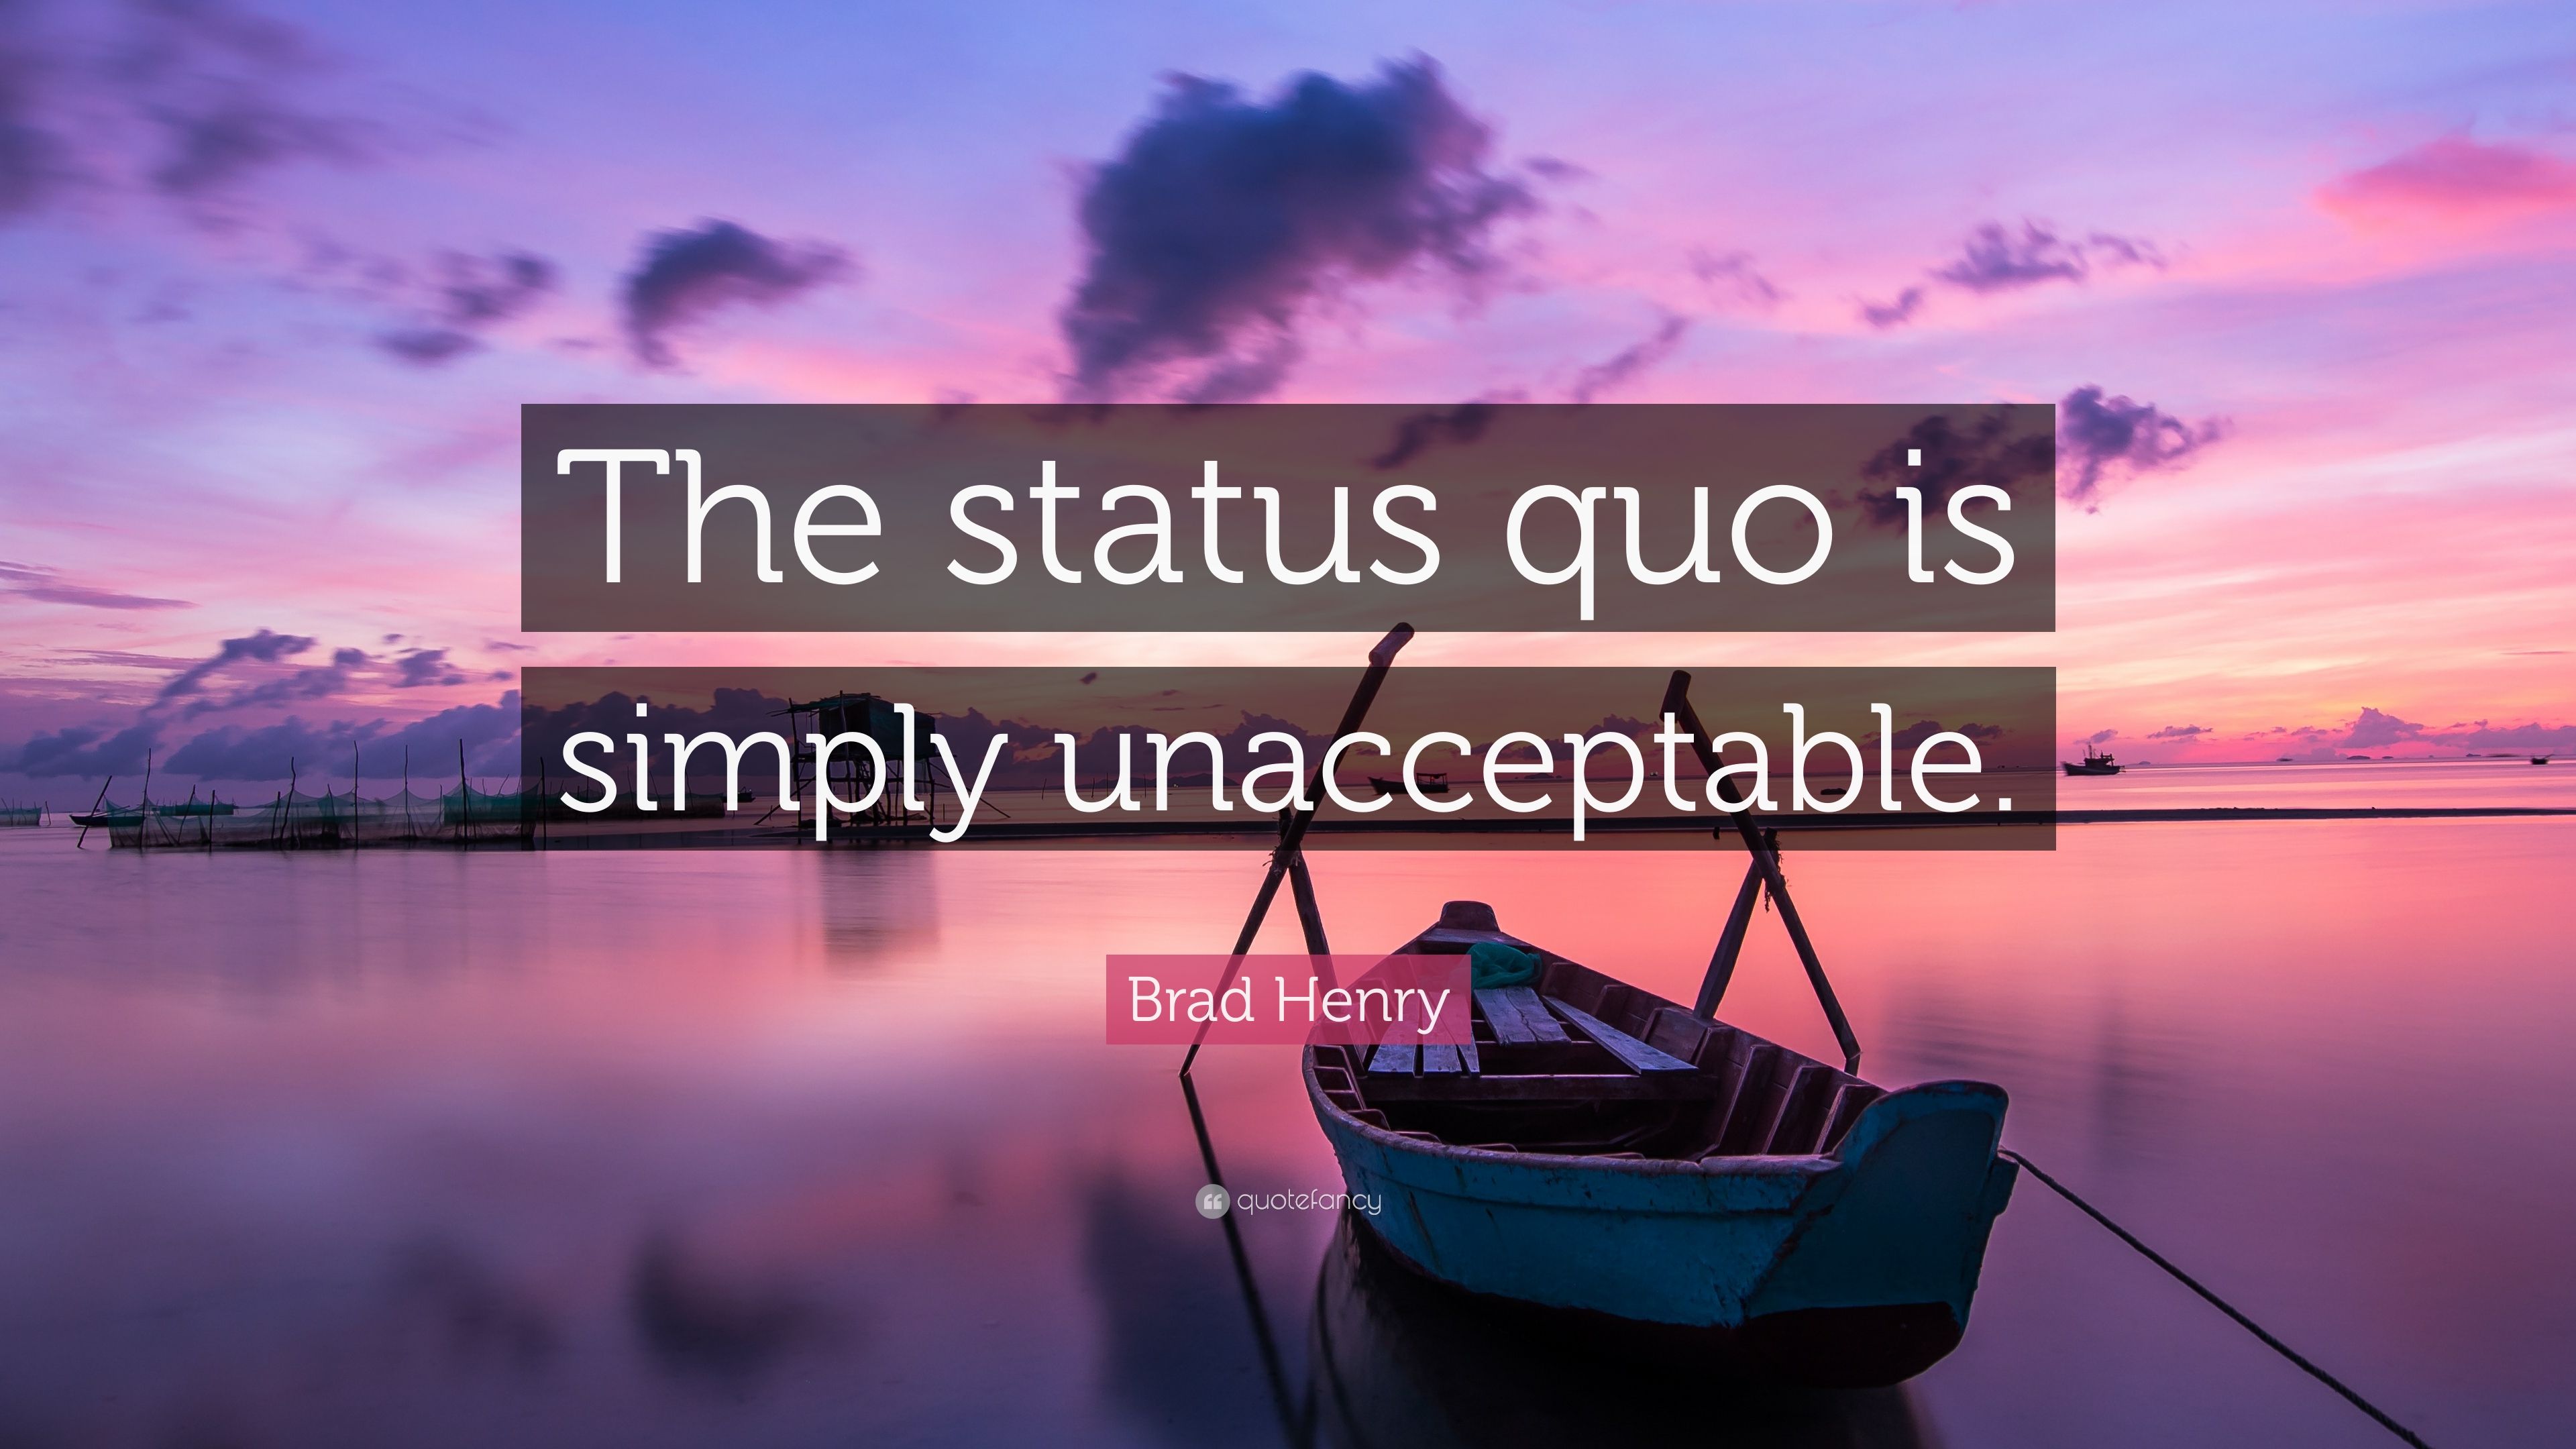 Brad Henry Quote: “The status quo is simply unacceptable.” 7